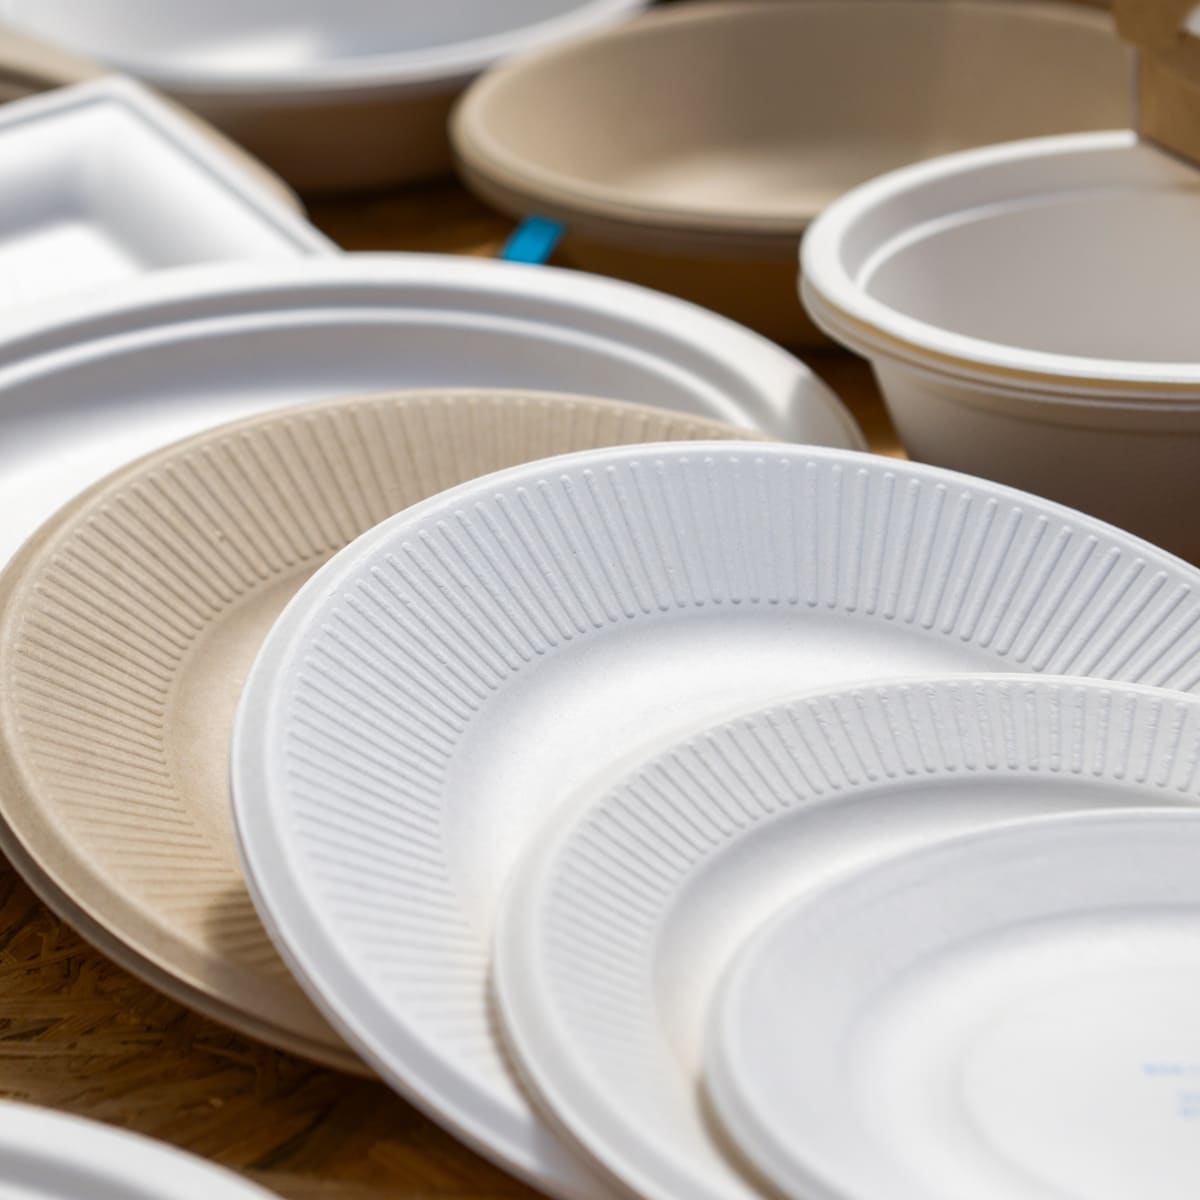 Different Types of Paper Plates